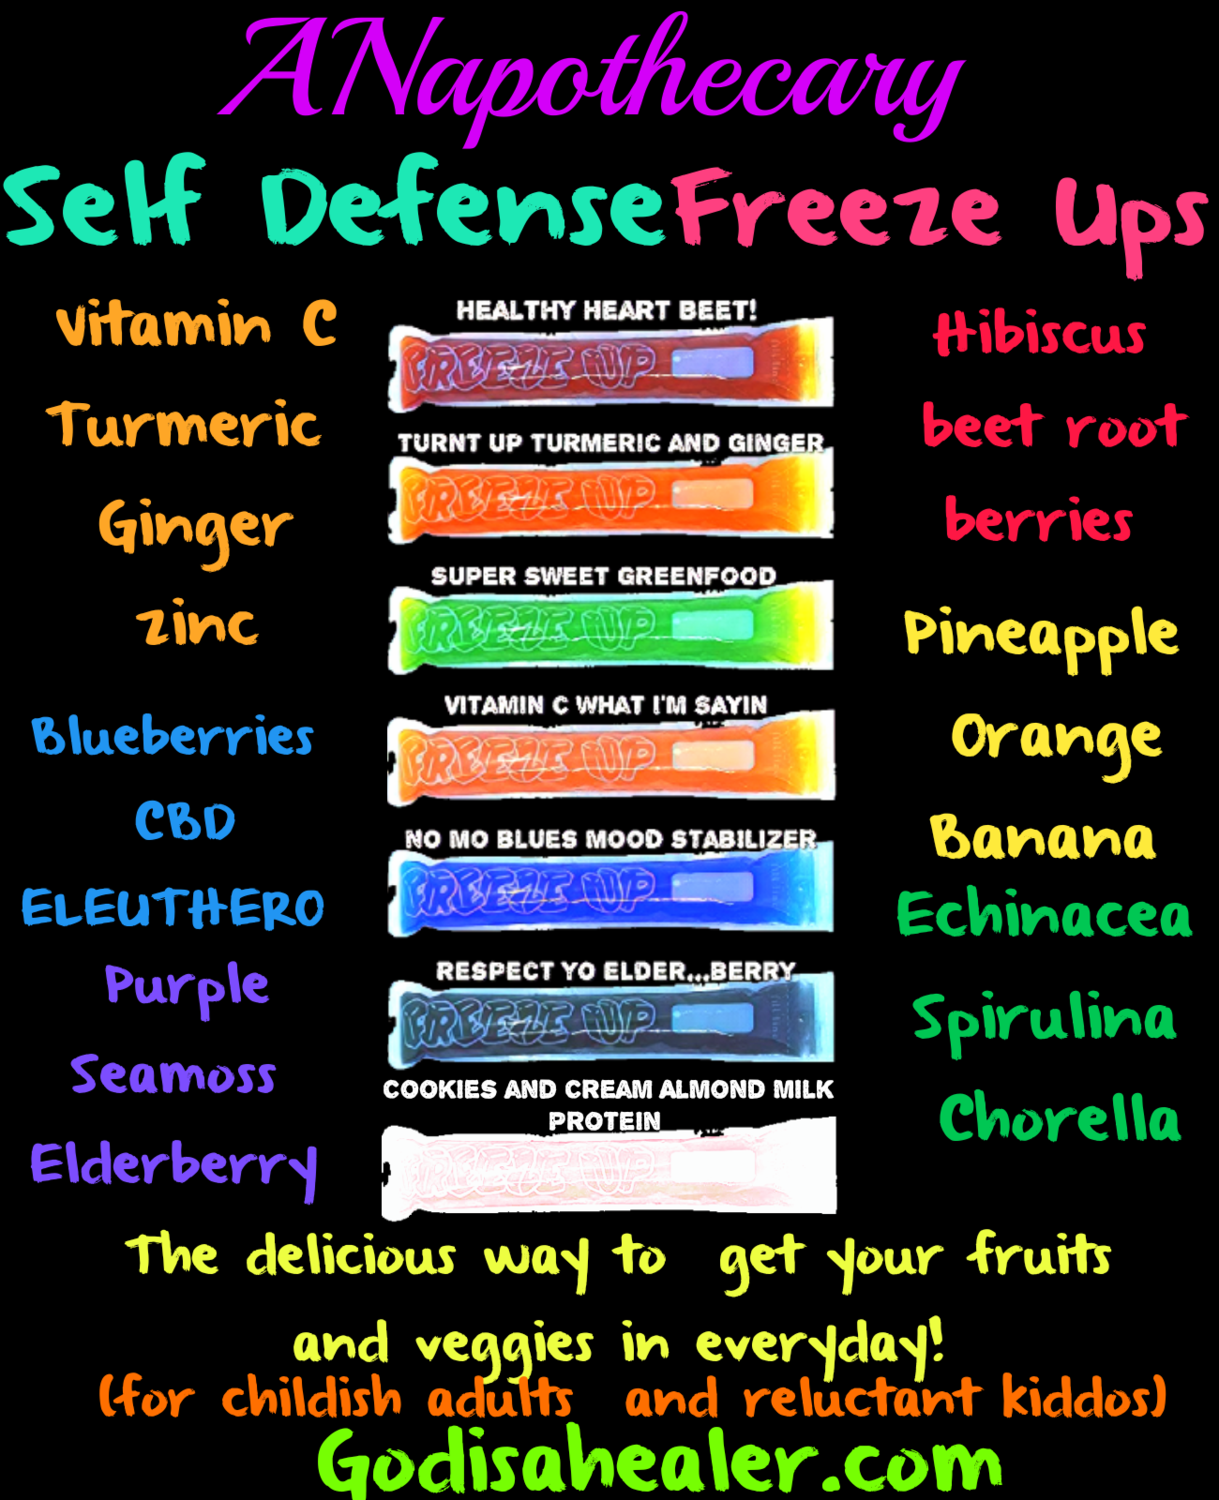 Self Defense Freeze Ups Variety 7 day Pack. Local pick up preferred, fresh fruit and veggies inside!